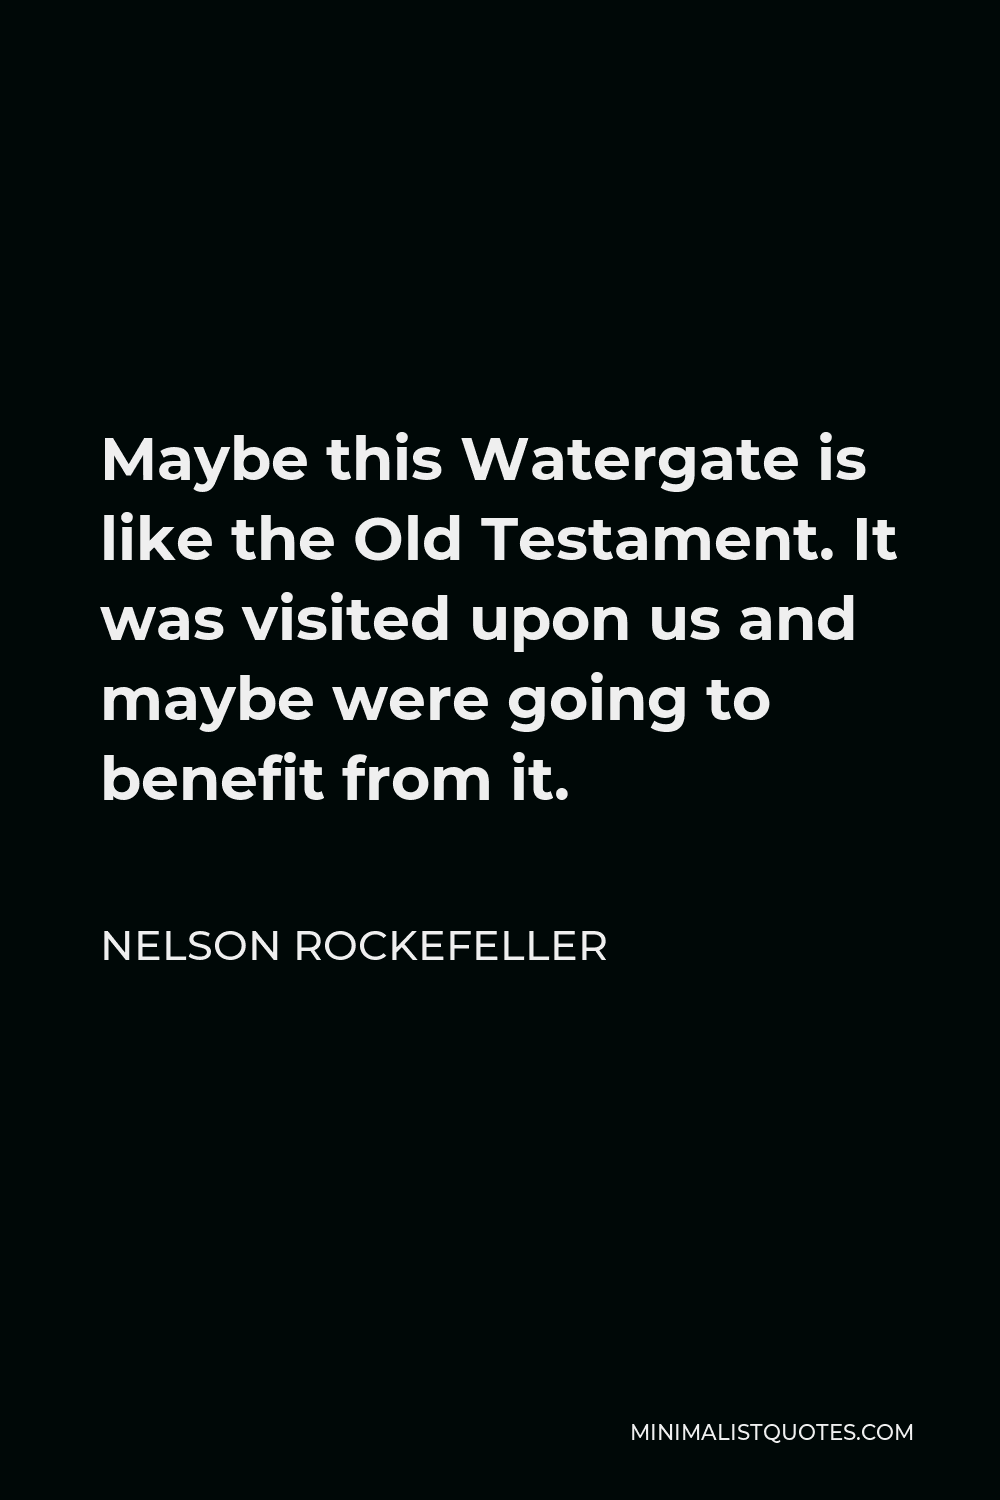 Nelson Rockefeller Quote - Maybe this Watergate is like the Old Testament. It was visited upon us and maybe were going to benefit from it.